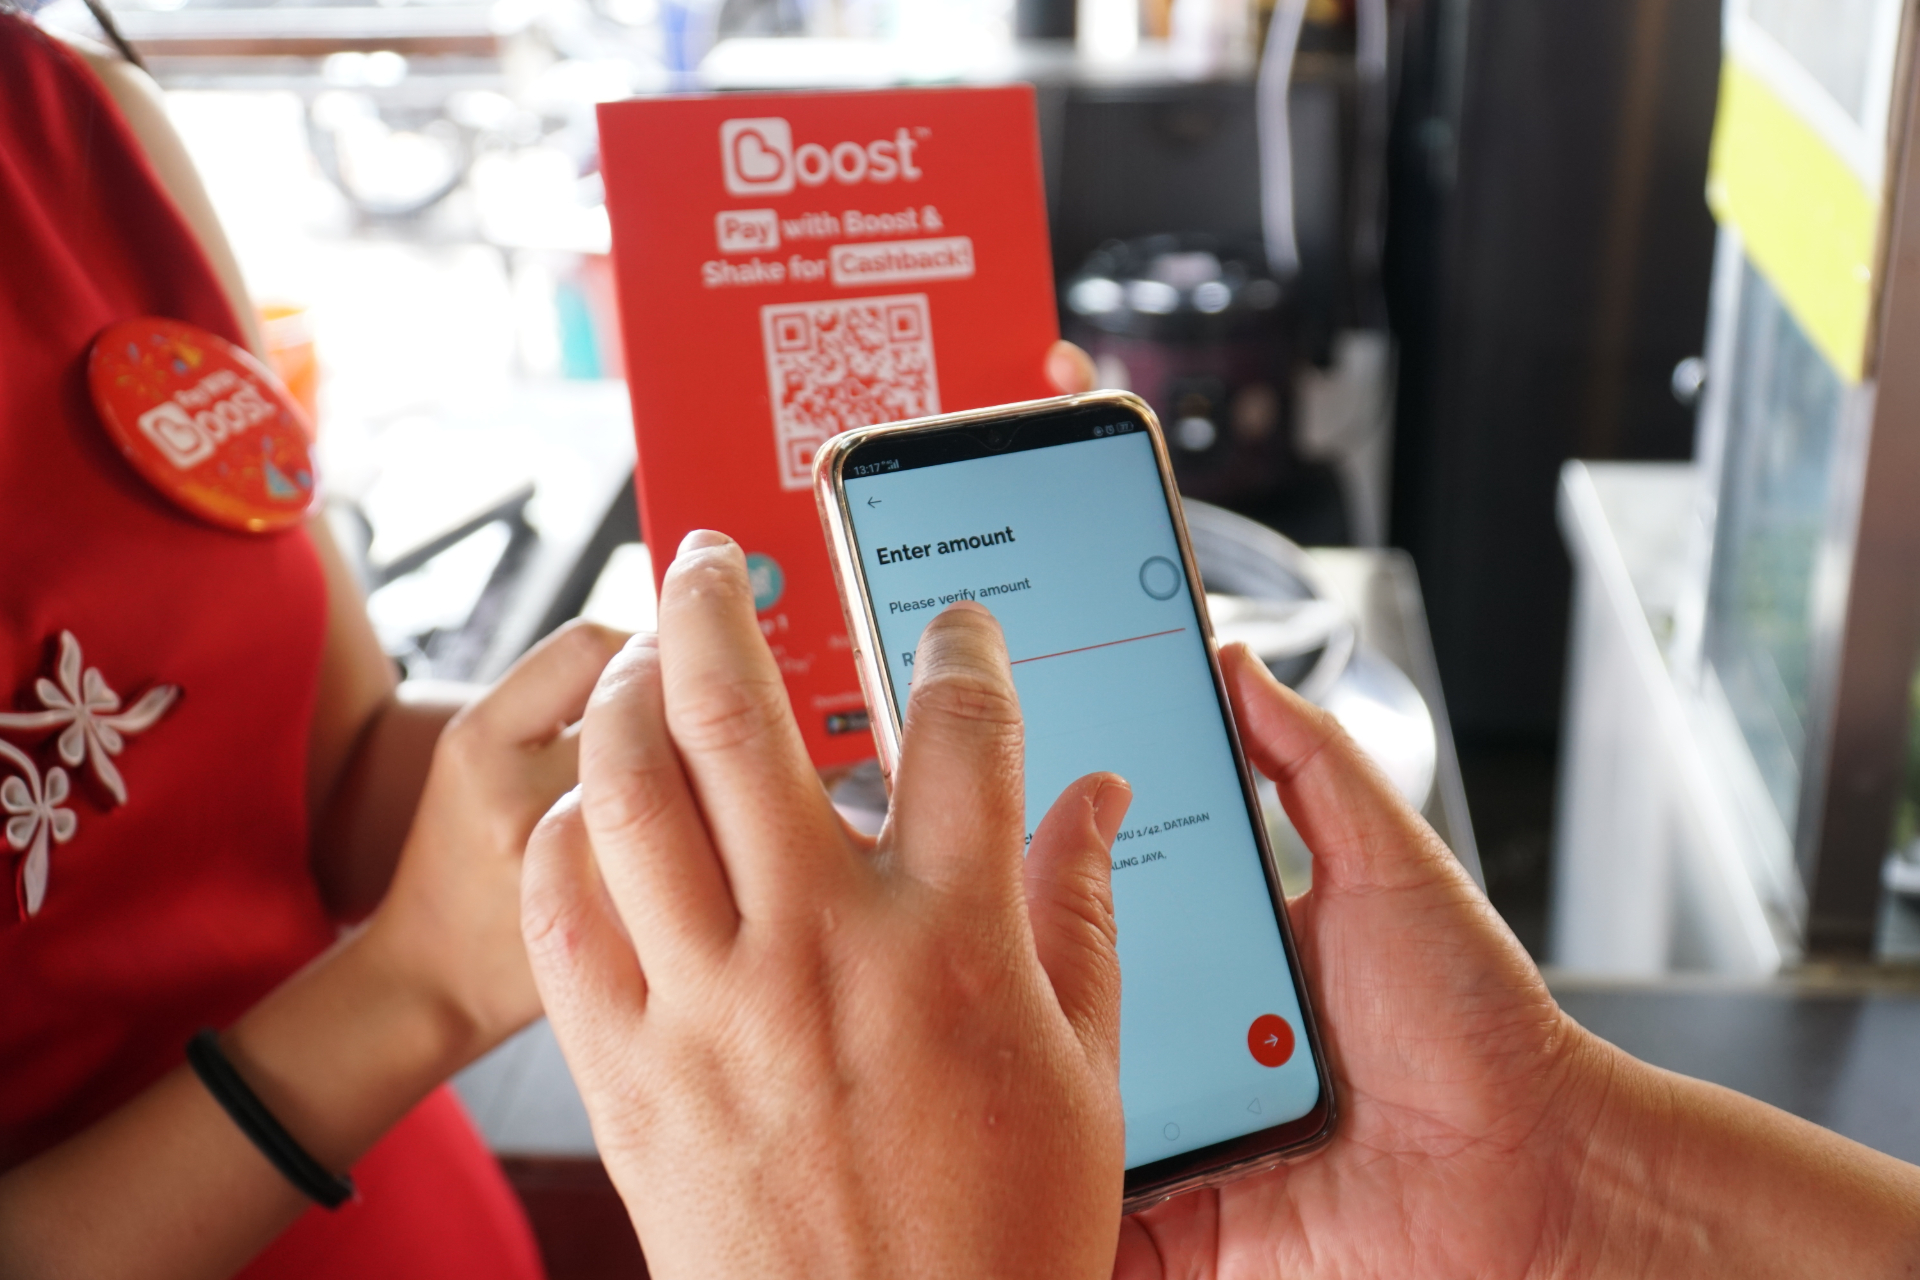 Paying with Boost e wallet